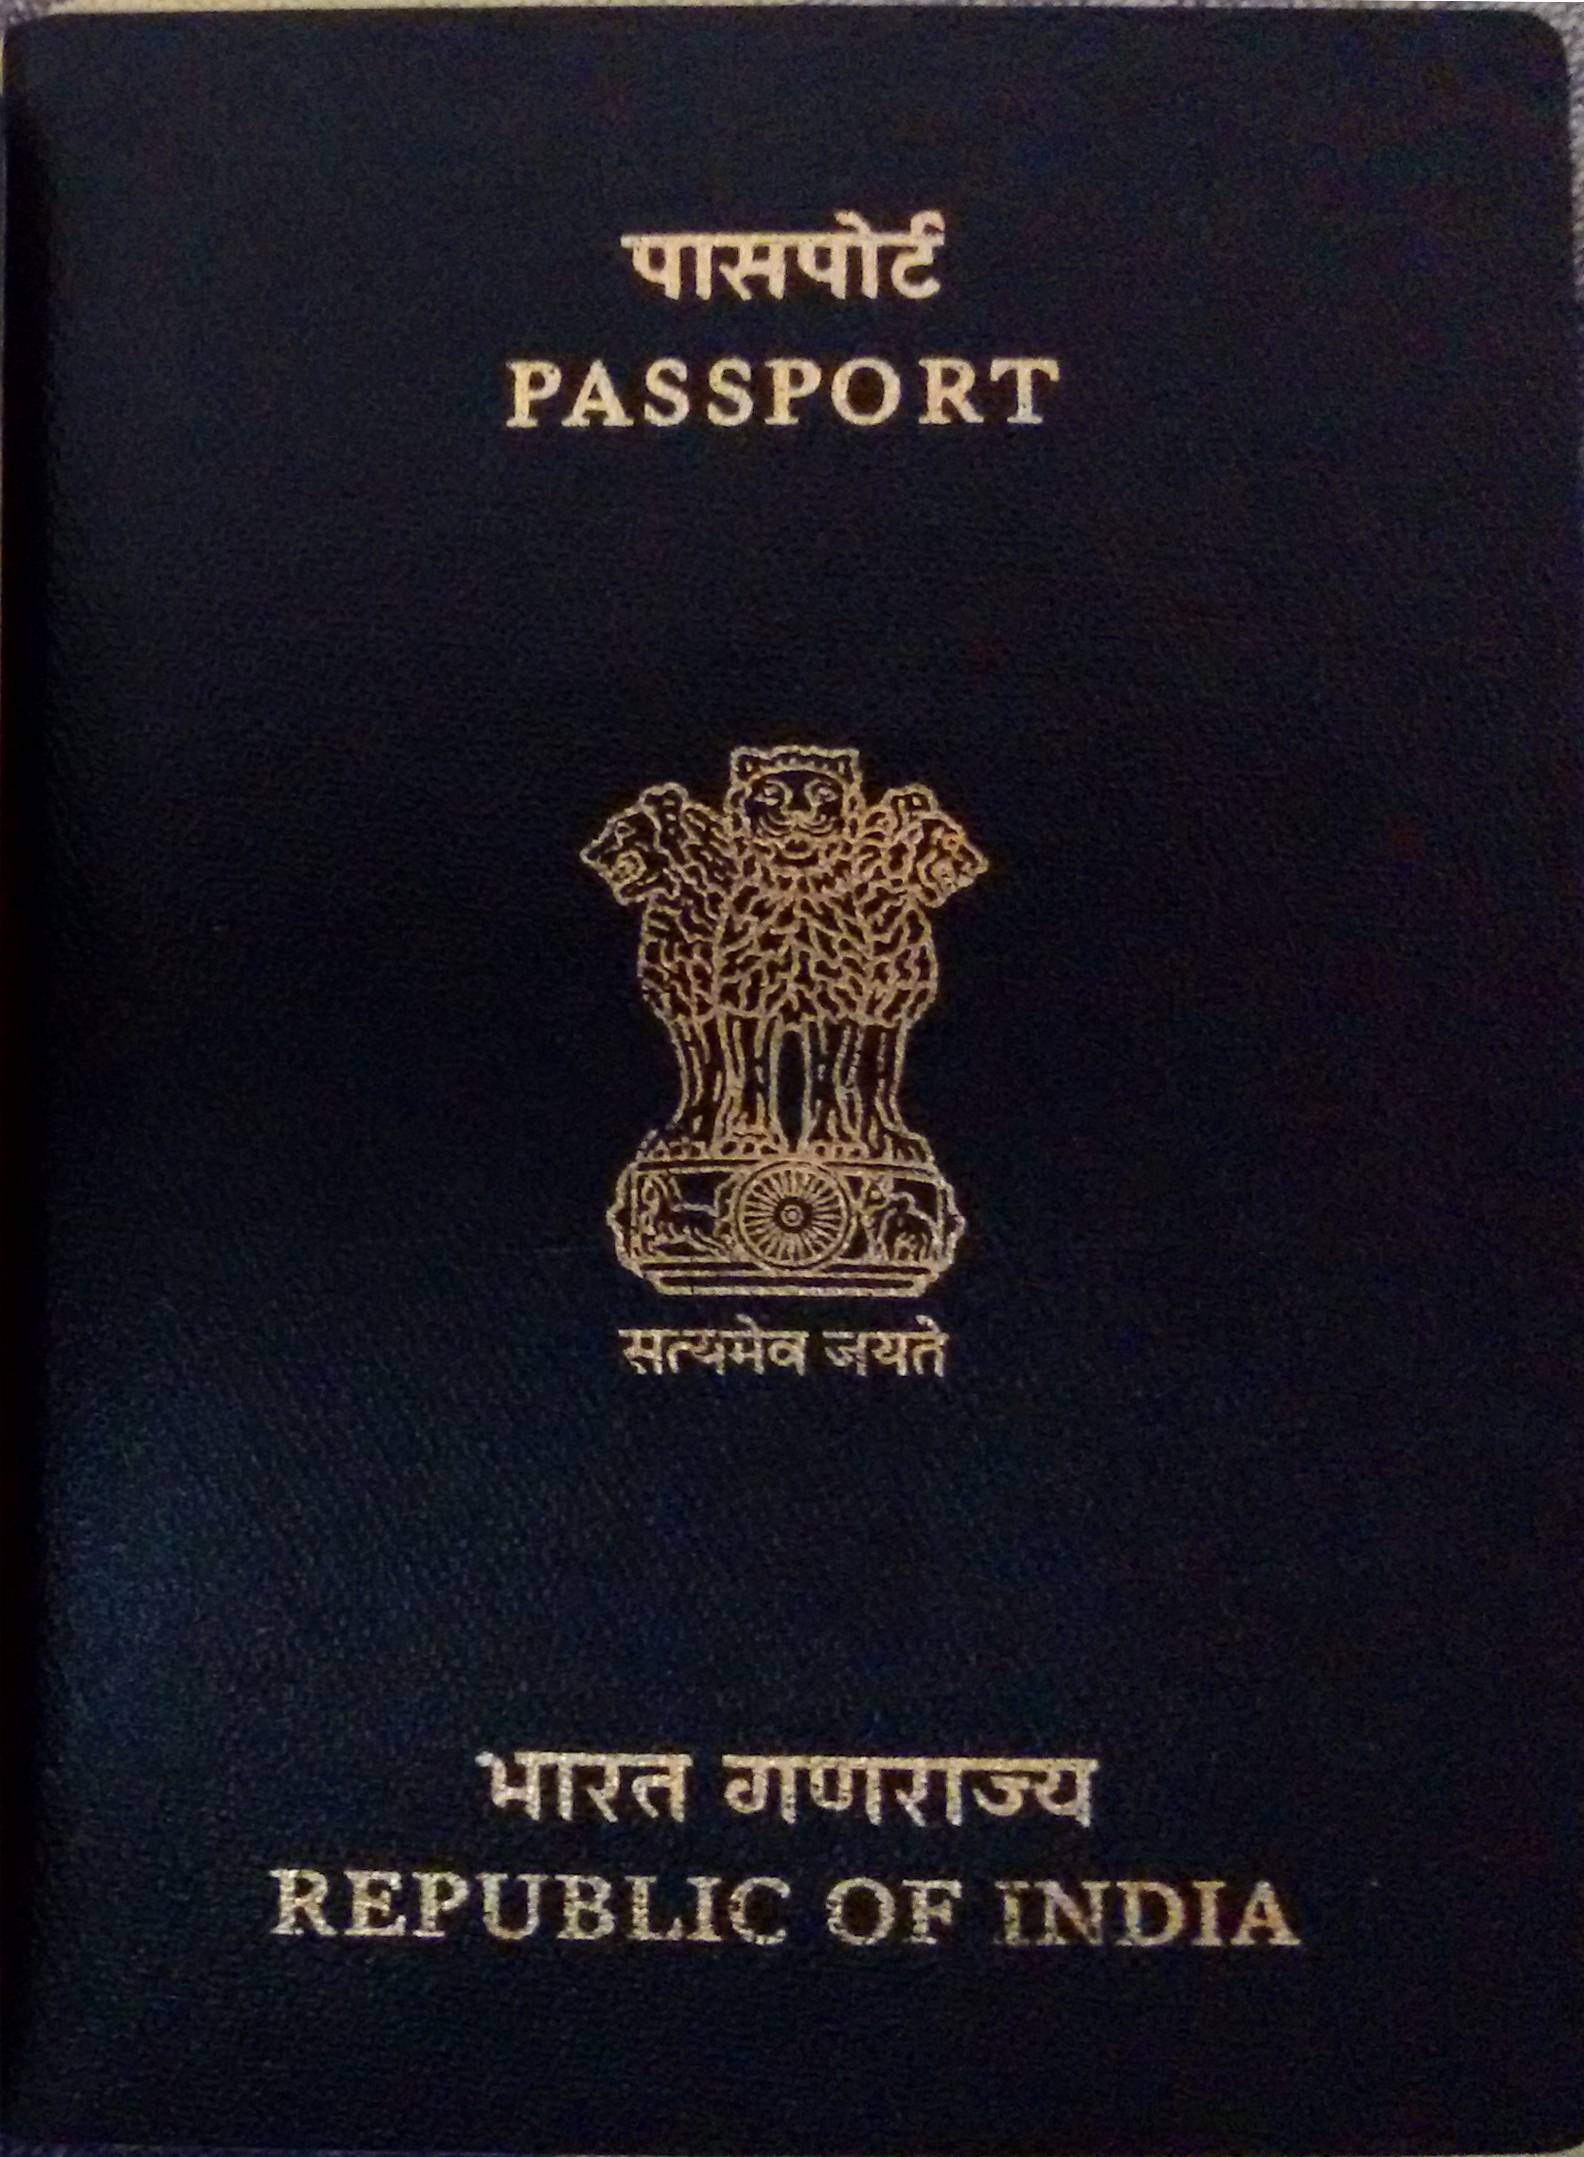 Orange and Blue Indian Logo - Indian Passport makeover: Orange is the new Blue - Live from a Lounge